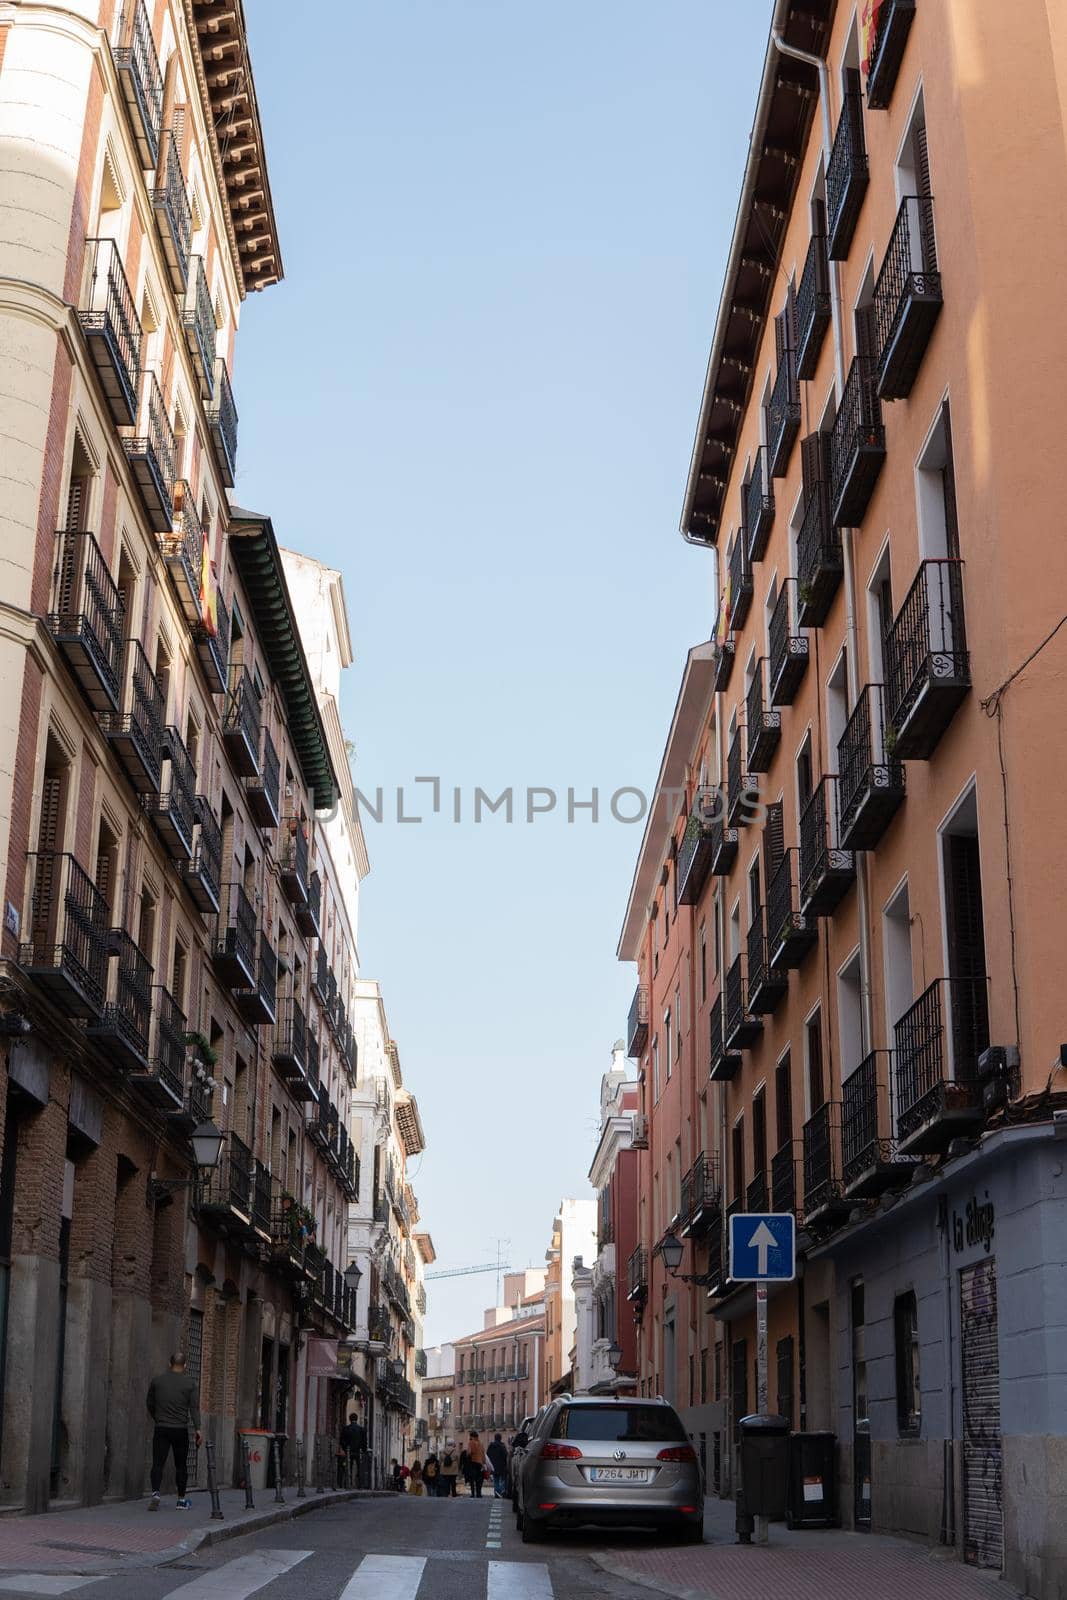 Straight street in madrid surrounded by old and beautiful buildings